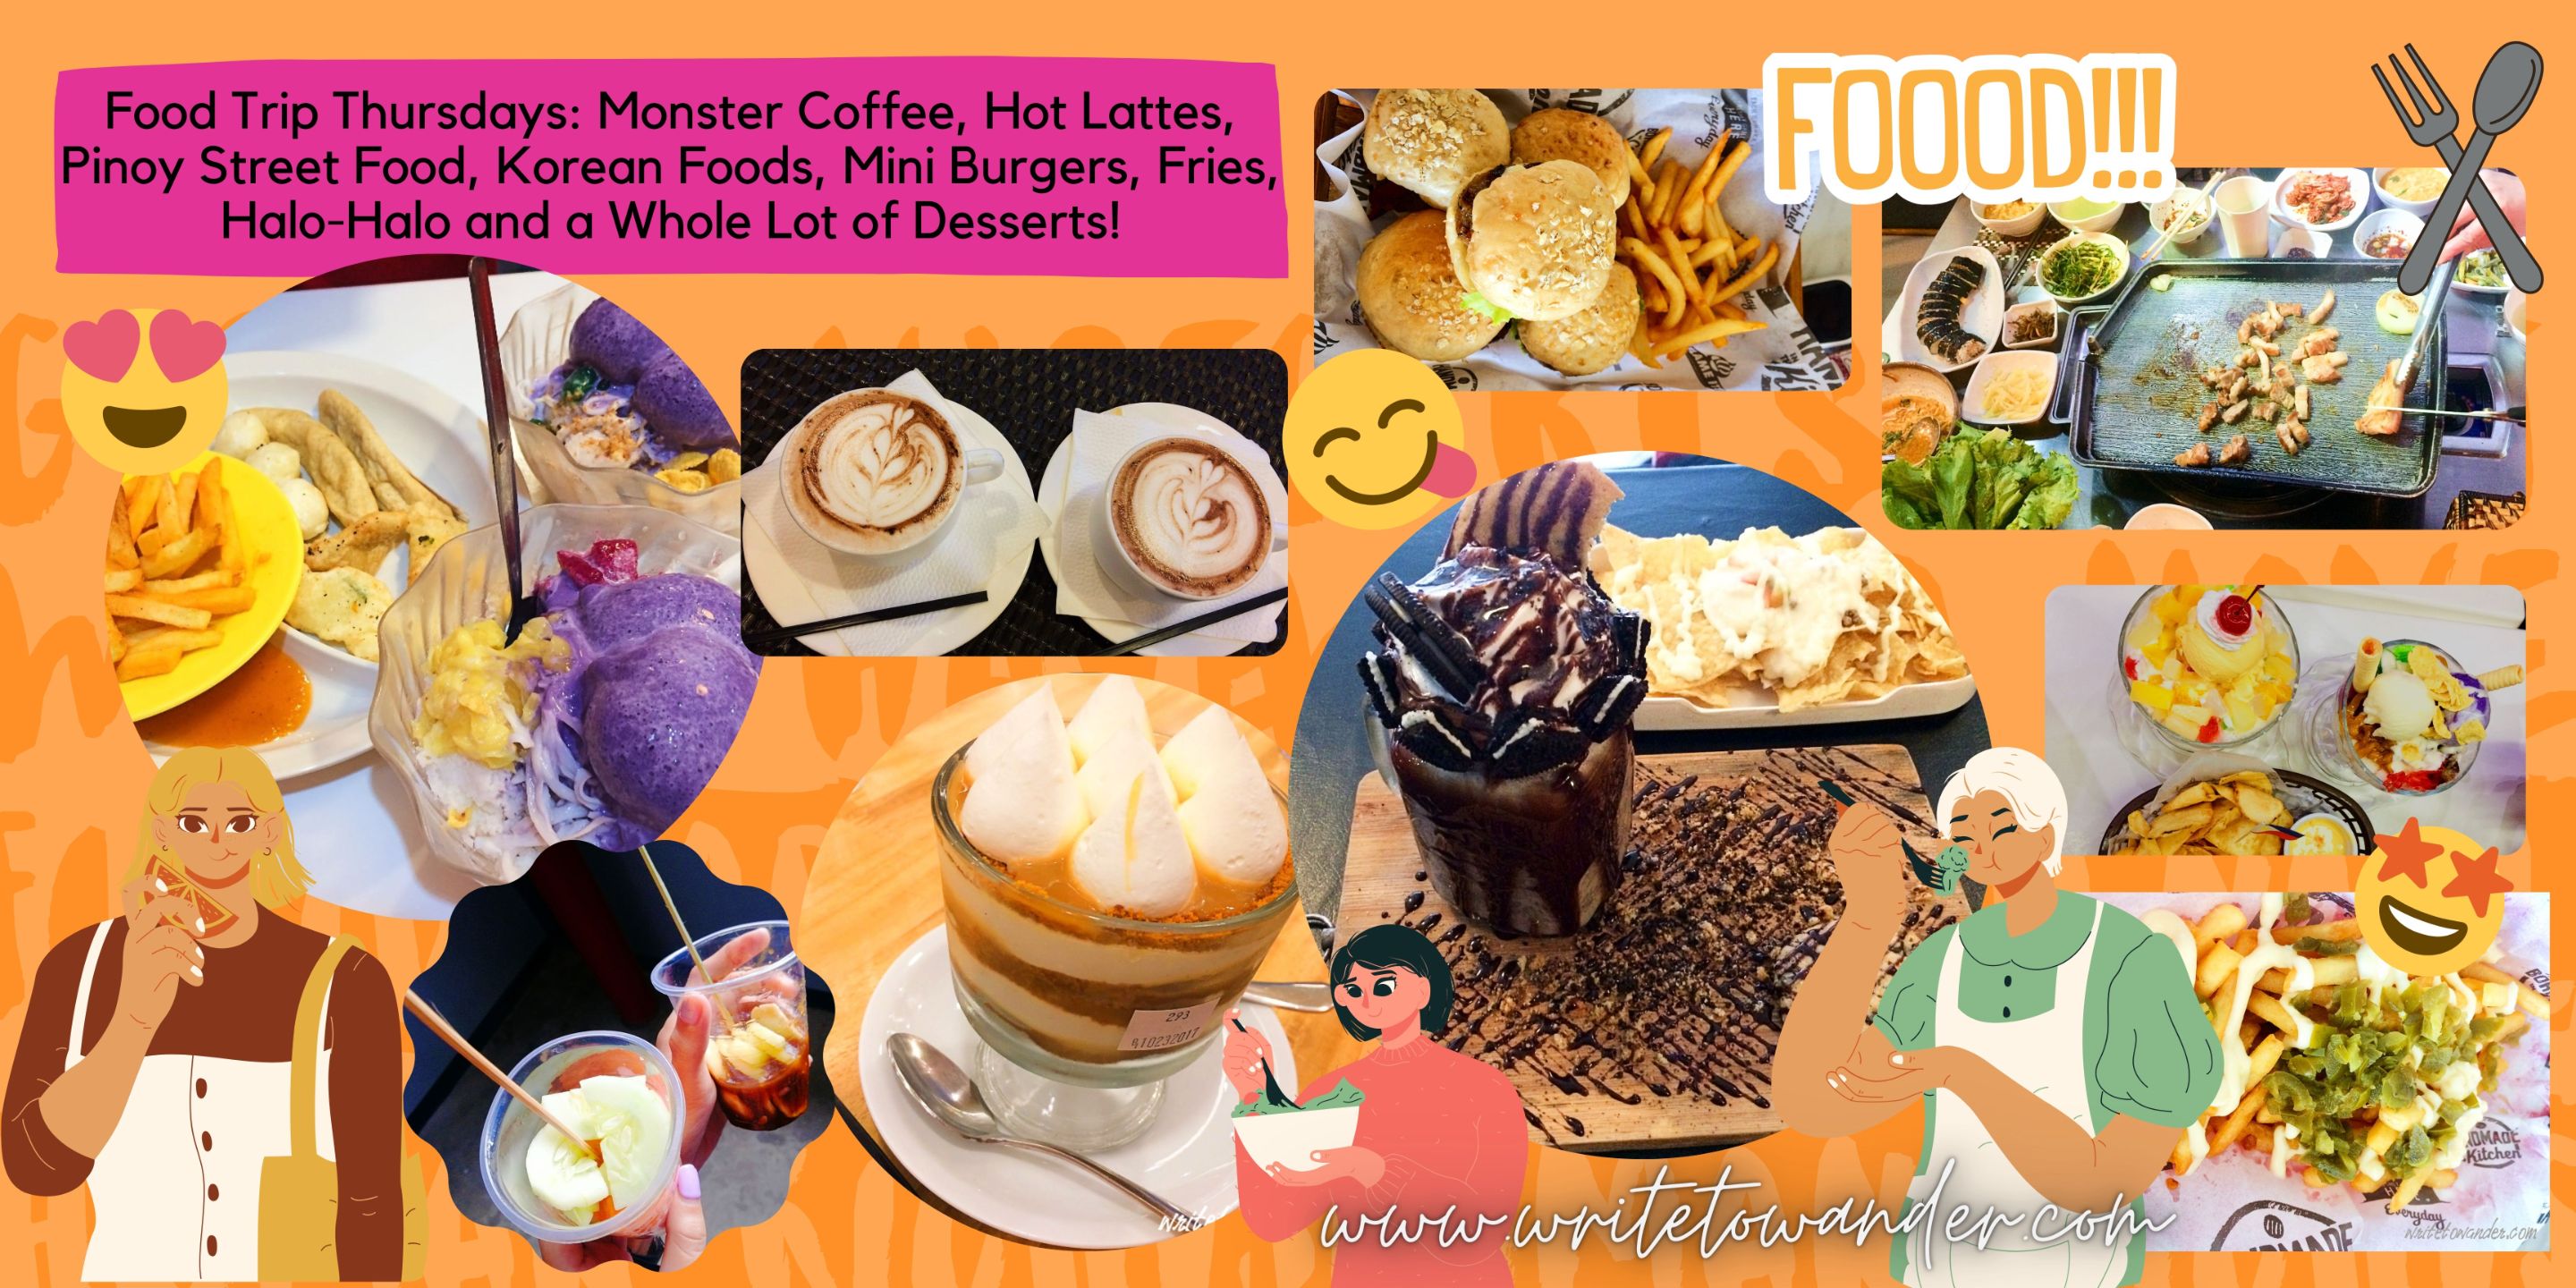 Food Trip Thursdays Monster Coffee, Hot Lattes, Pinoy Street Food, Korean Foods, Mini Burgers, Fries, Halo-Halo and a Whole Lot of Desserts.jpg